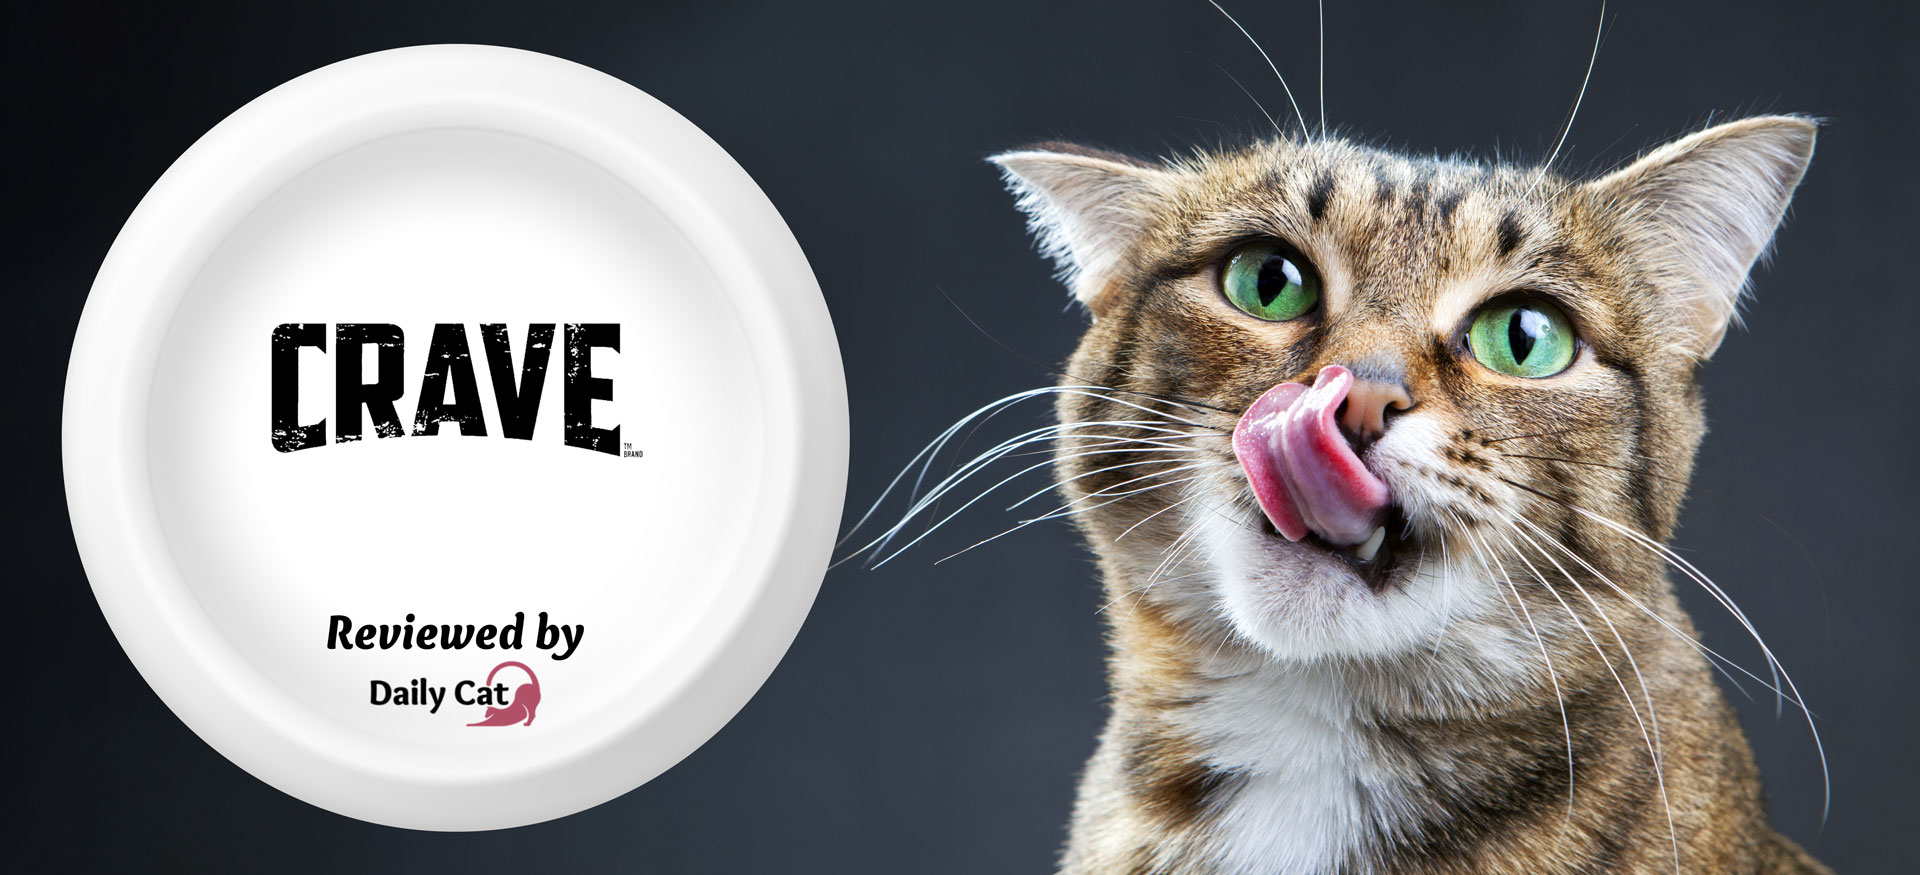 The Daily Cat-brand- Crave Cat Food Review Graphic